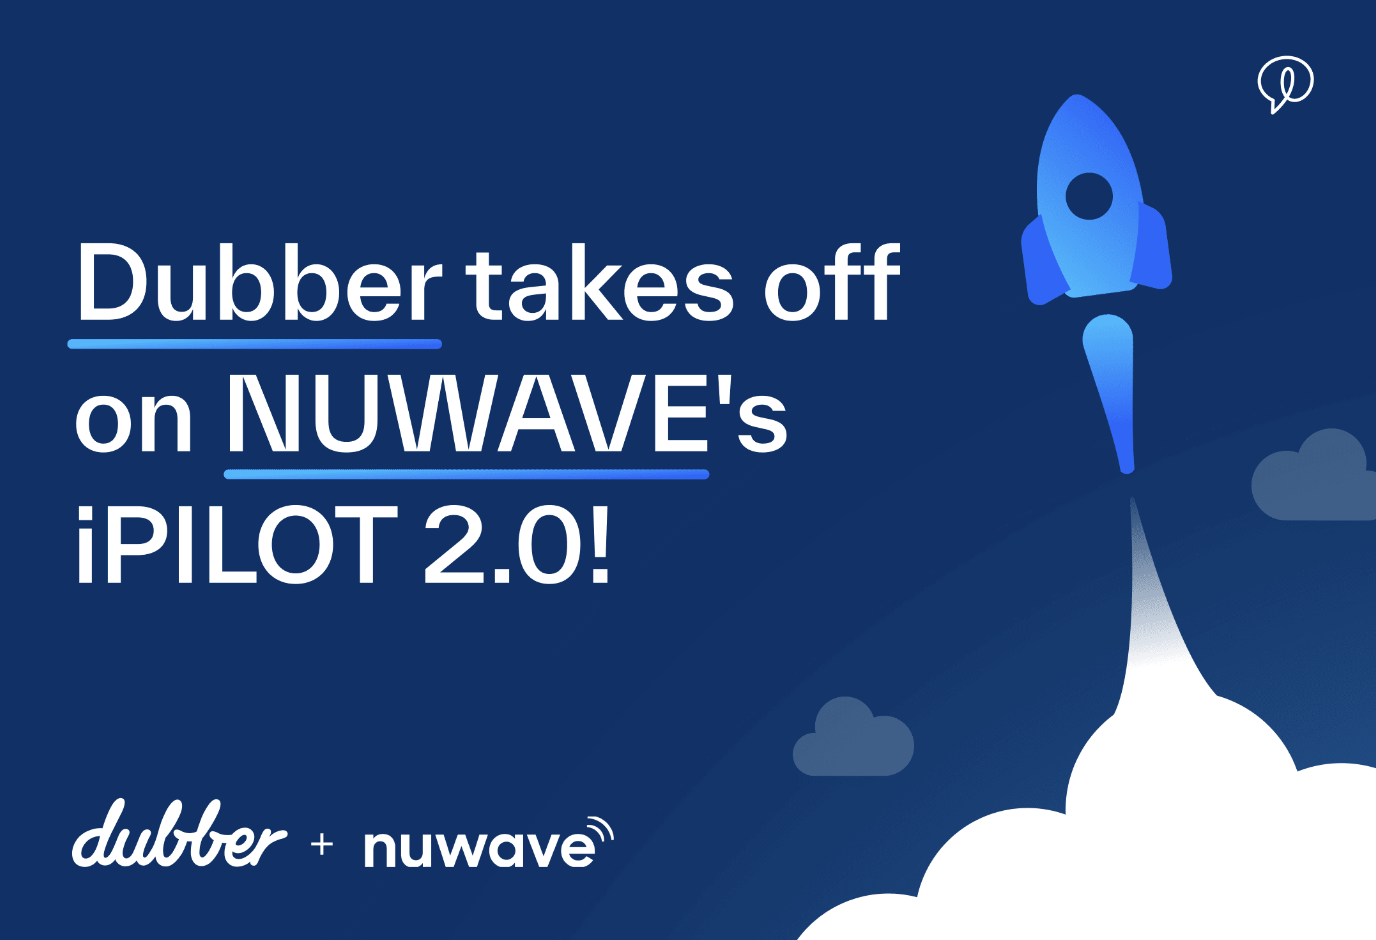 Dubber Now Available to all NUWAVE iPILOT 2.0 Customers